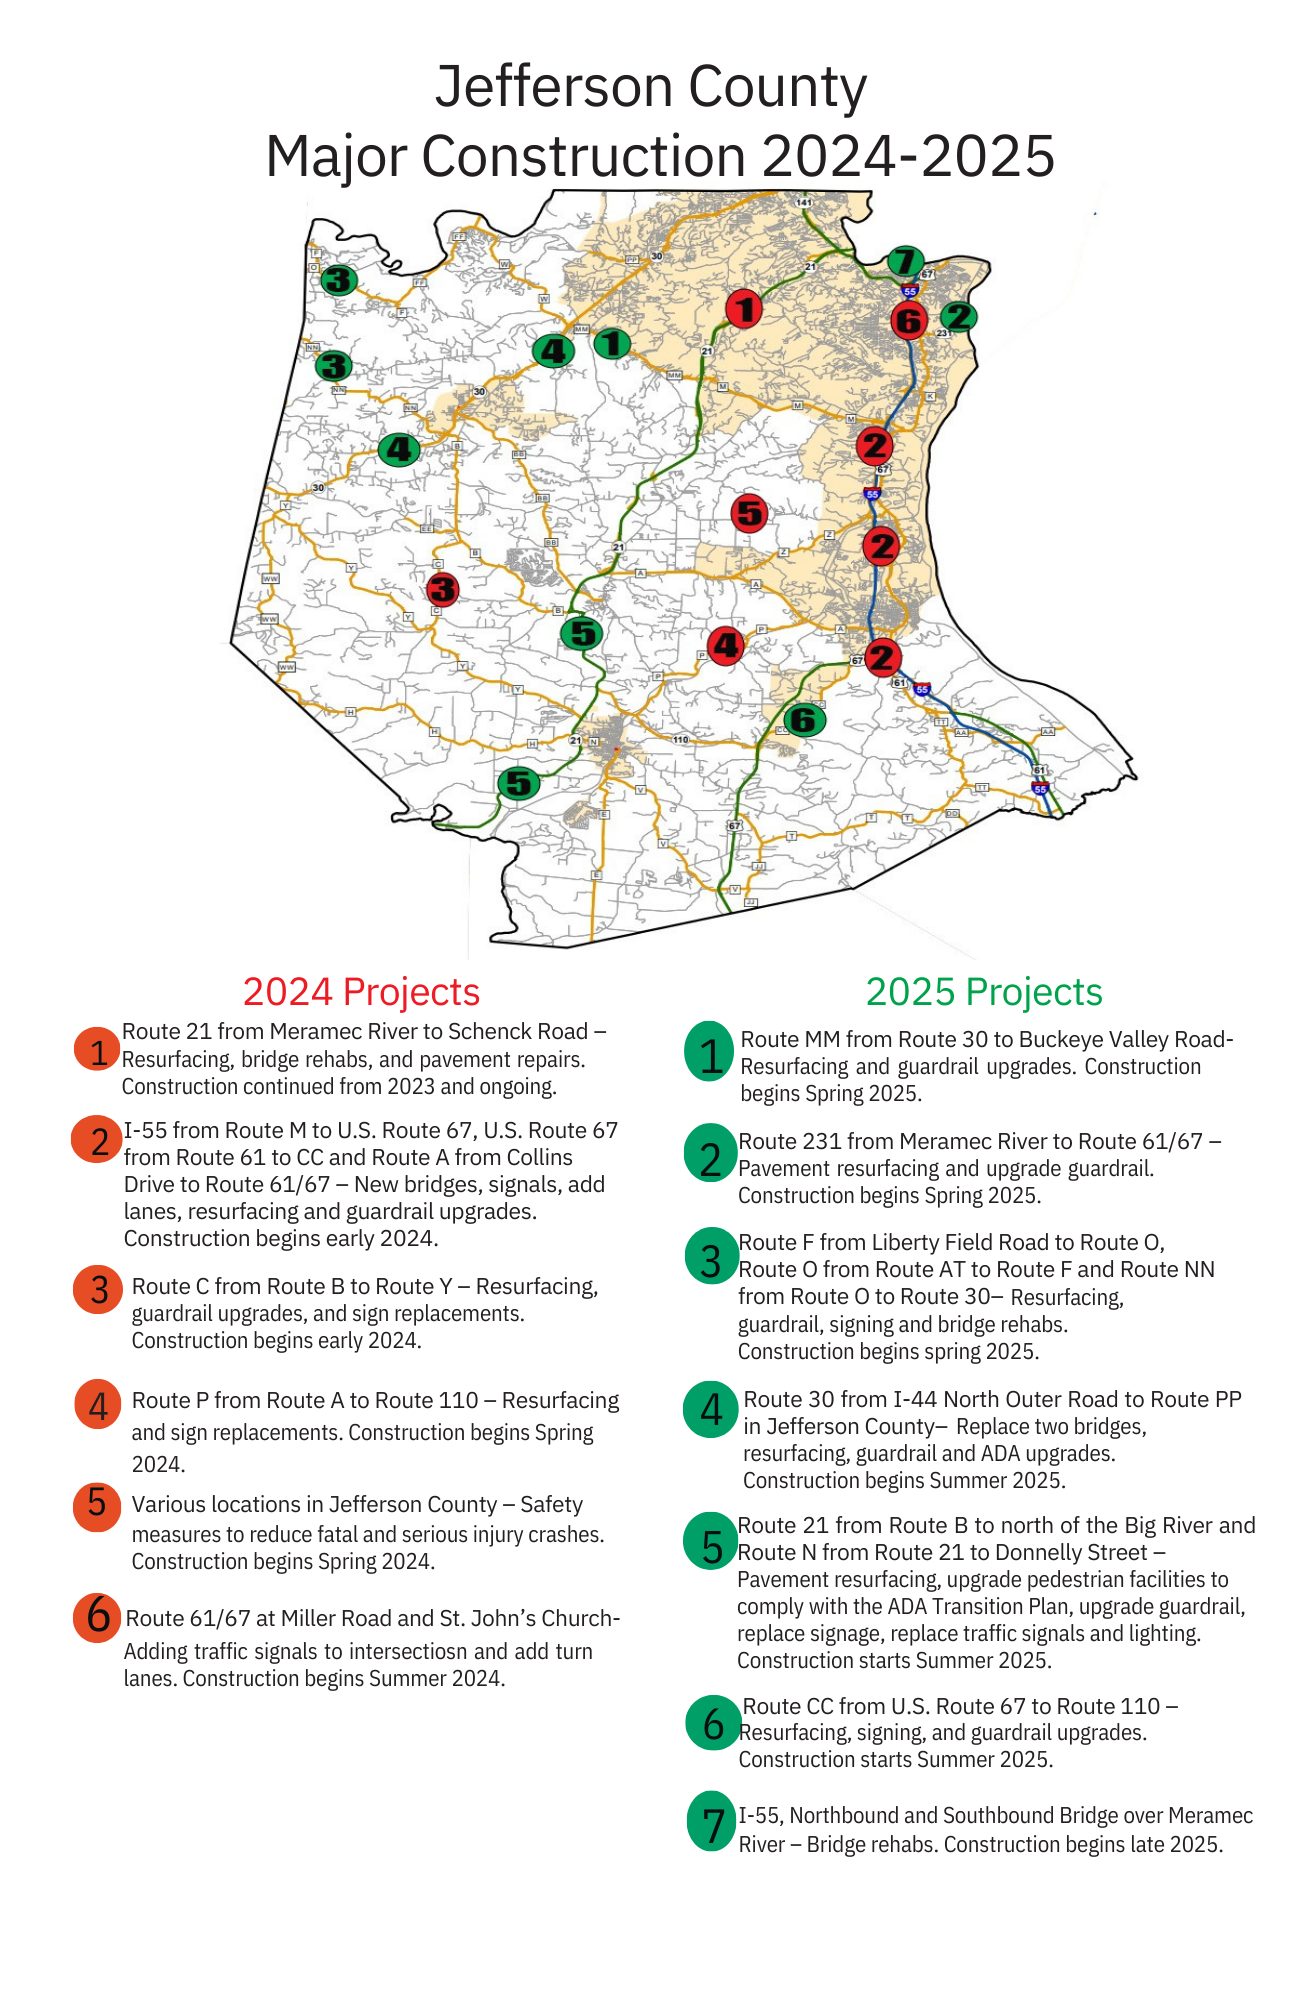 Jefferson County Projects Map - updated 2024-2025 a